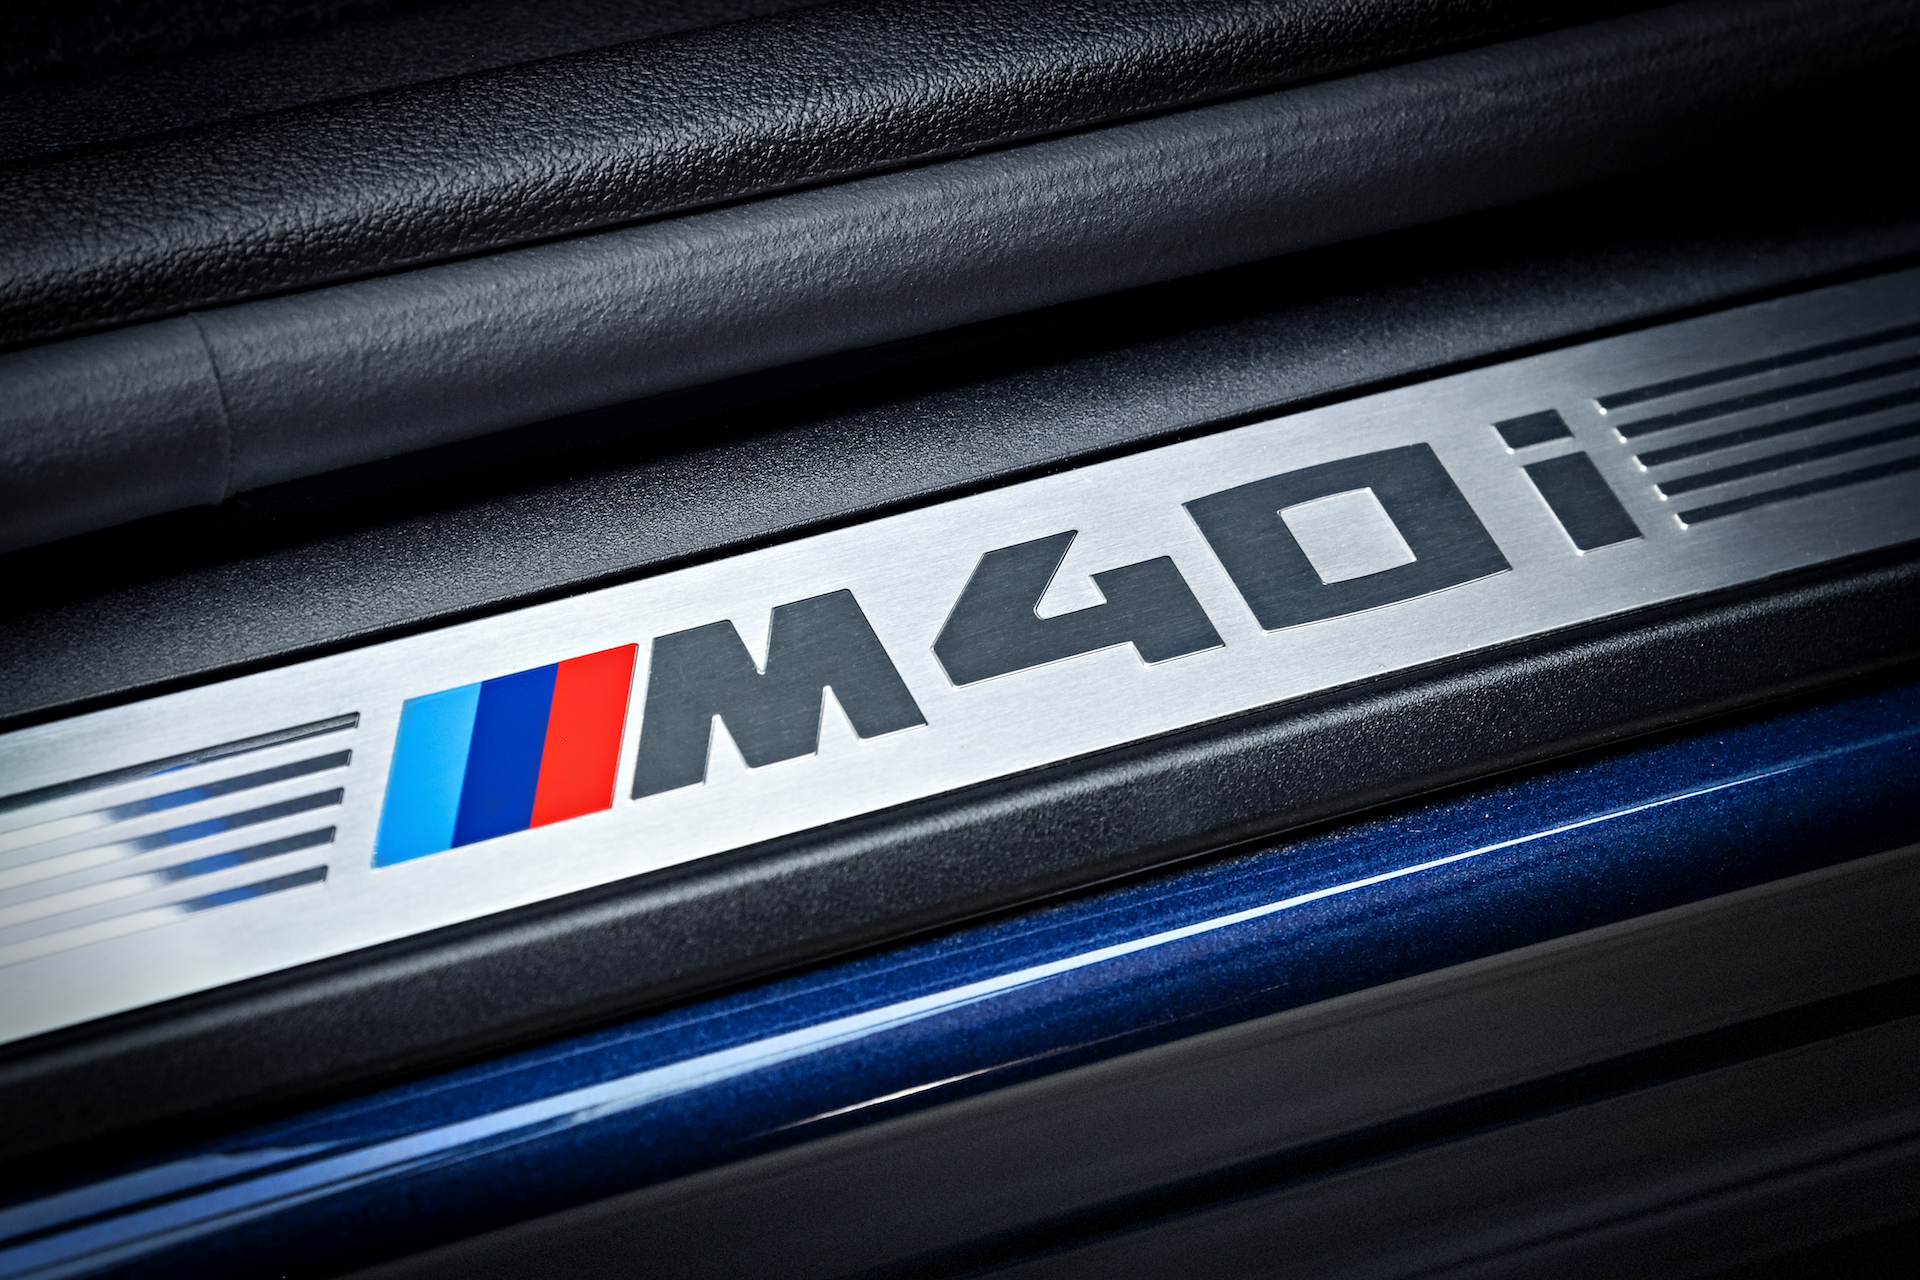 BMW to ditch lower-case “i” from its gas car model names Auto Recent